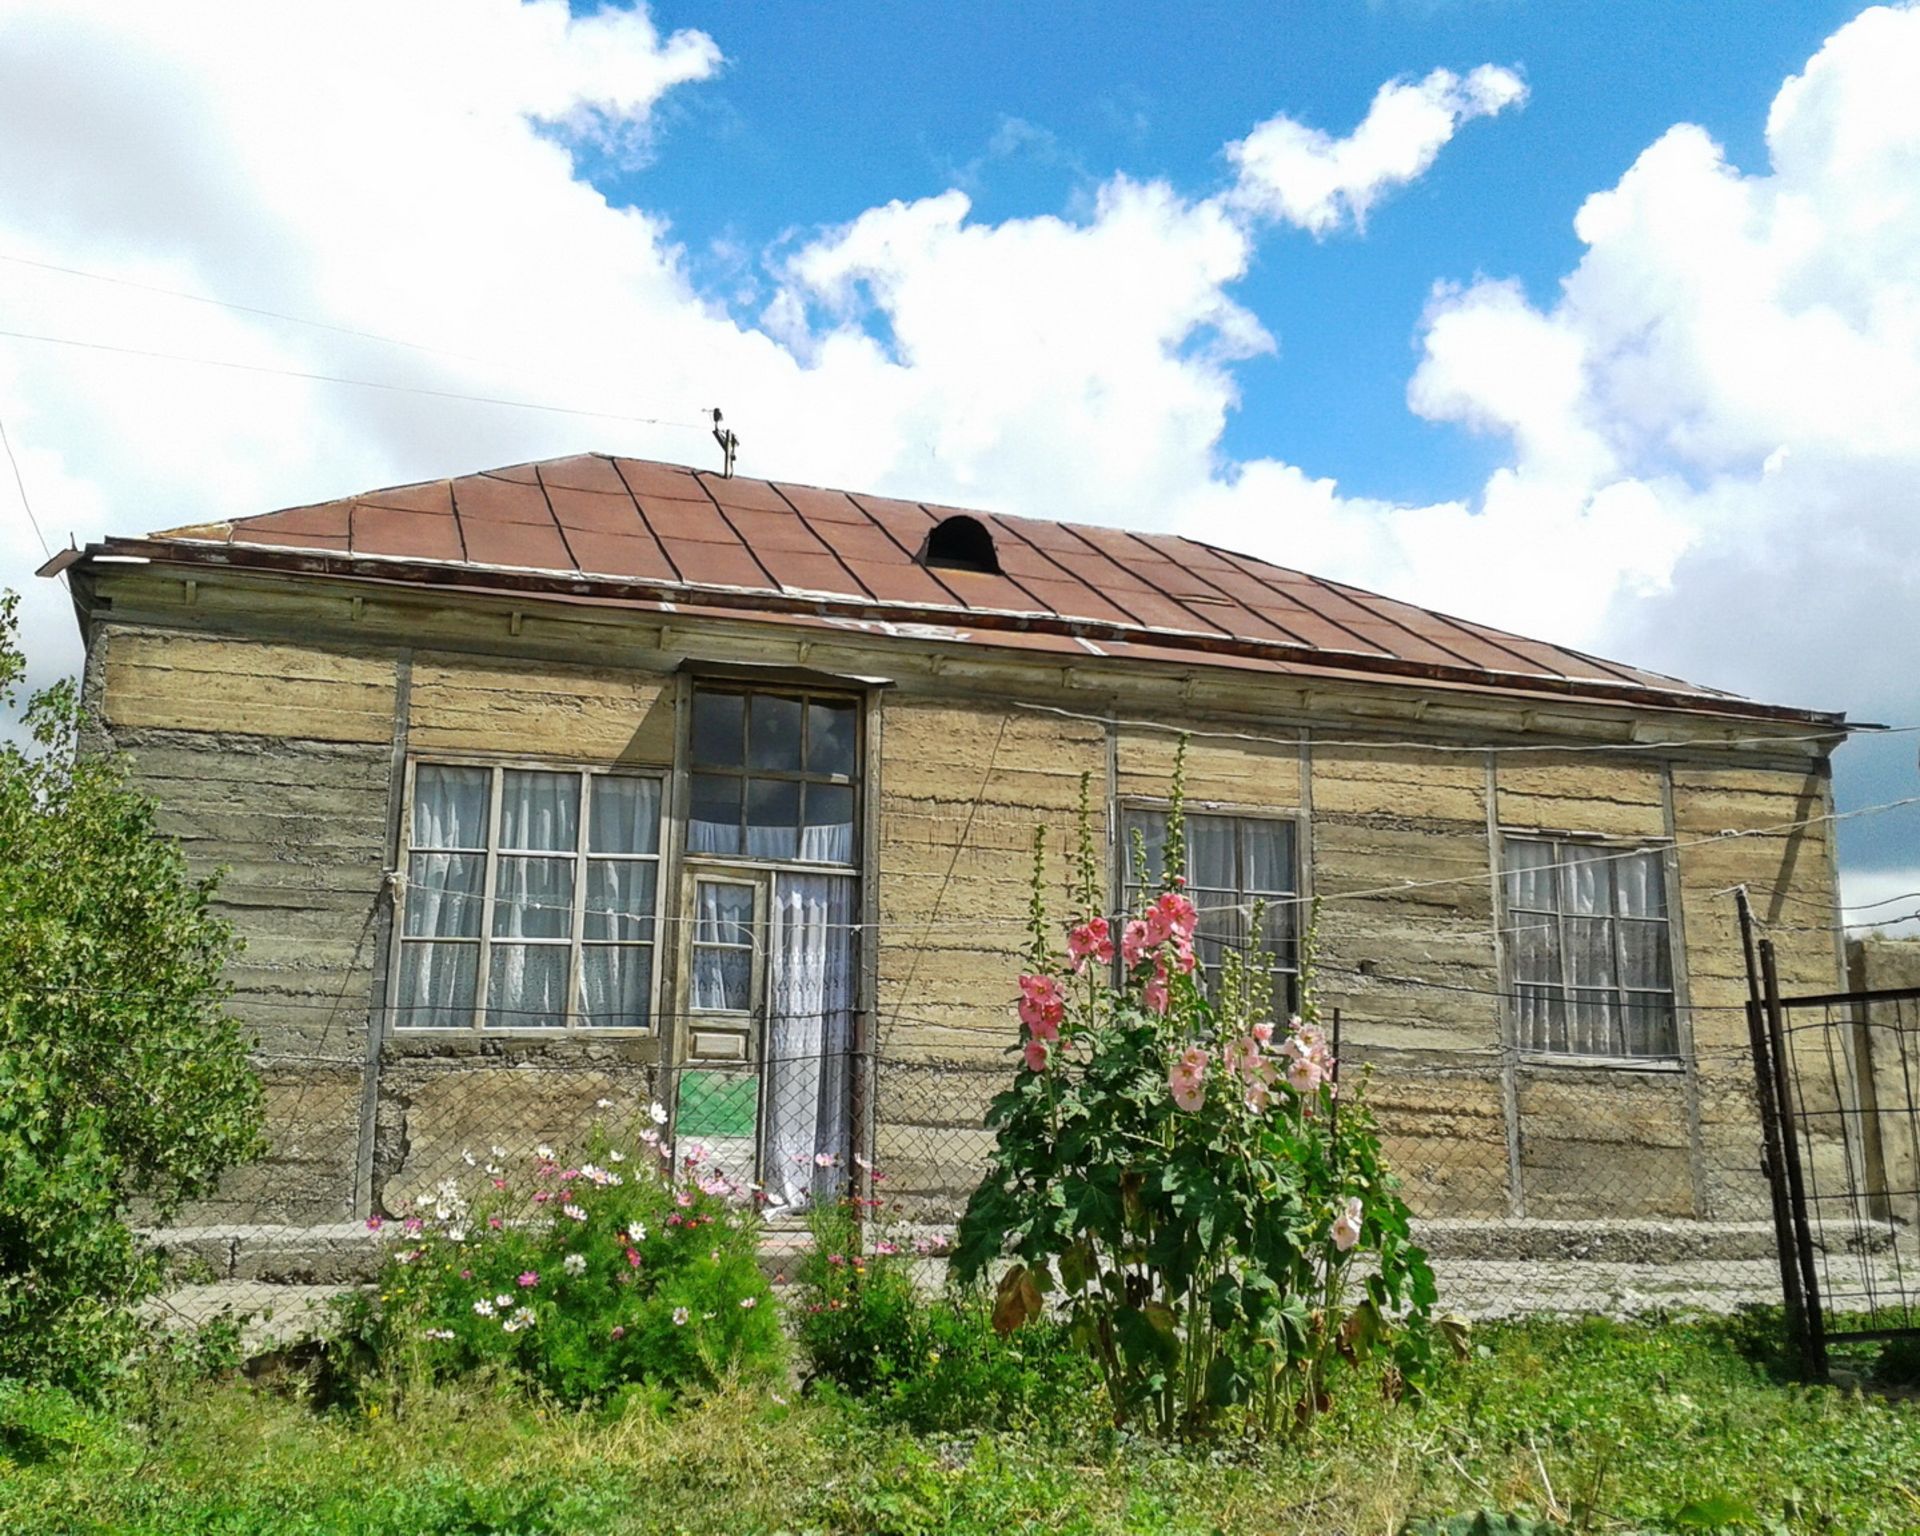 HOUSE IN 1 ACRE IN SOTK, ARMENIA - Image 3 of 35